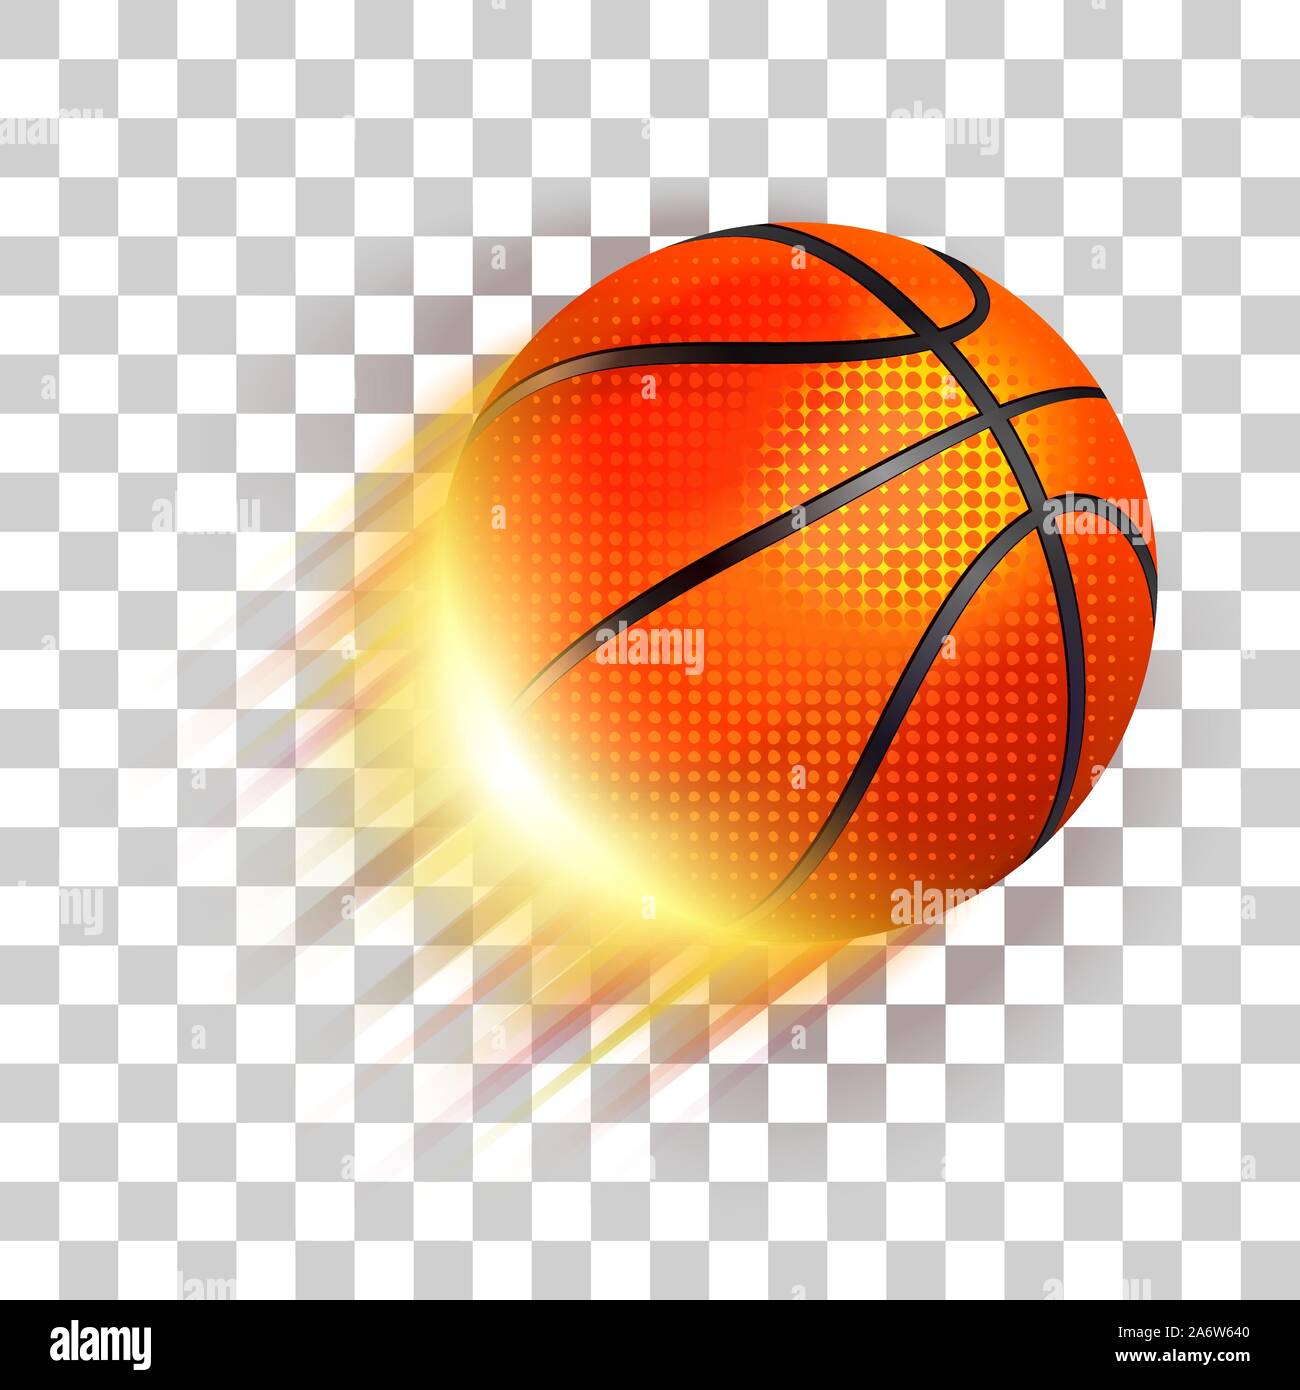 Basketball ball flying. Eps 10 editable, gradients with transparency. Easy to pu over any background. Stock Vector